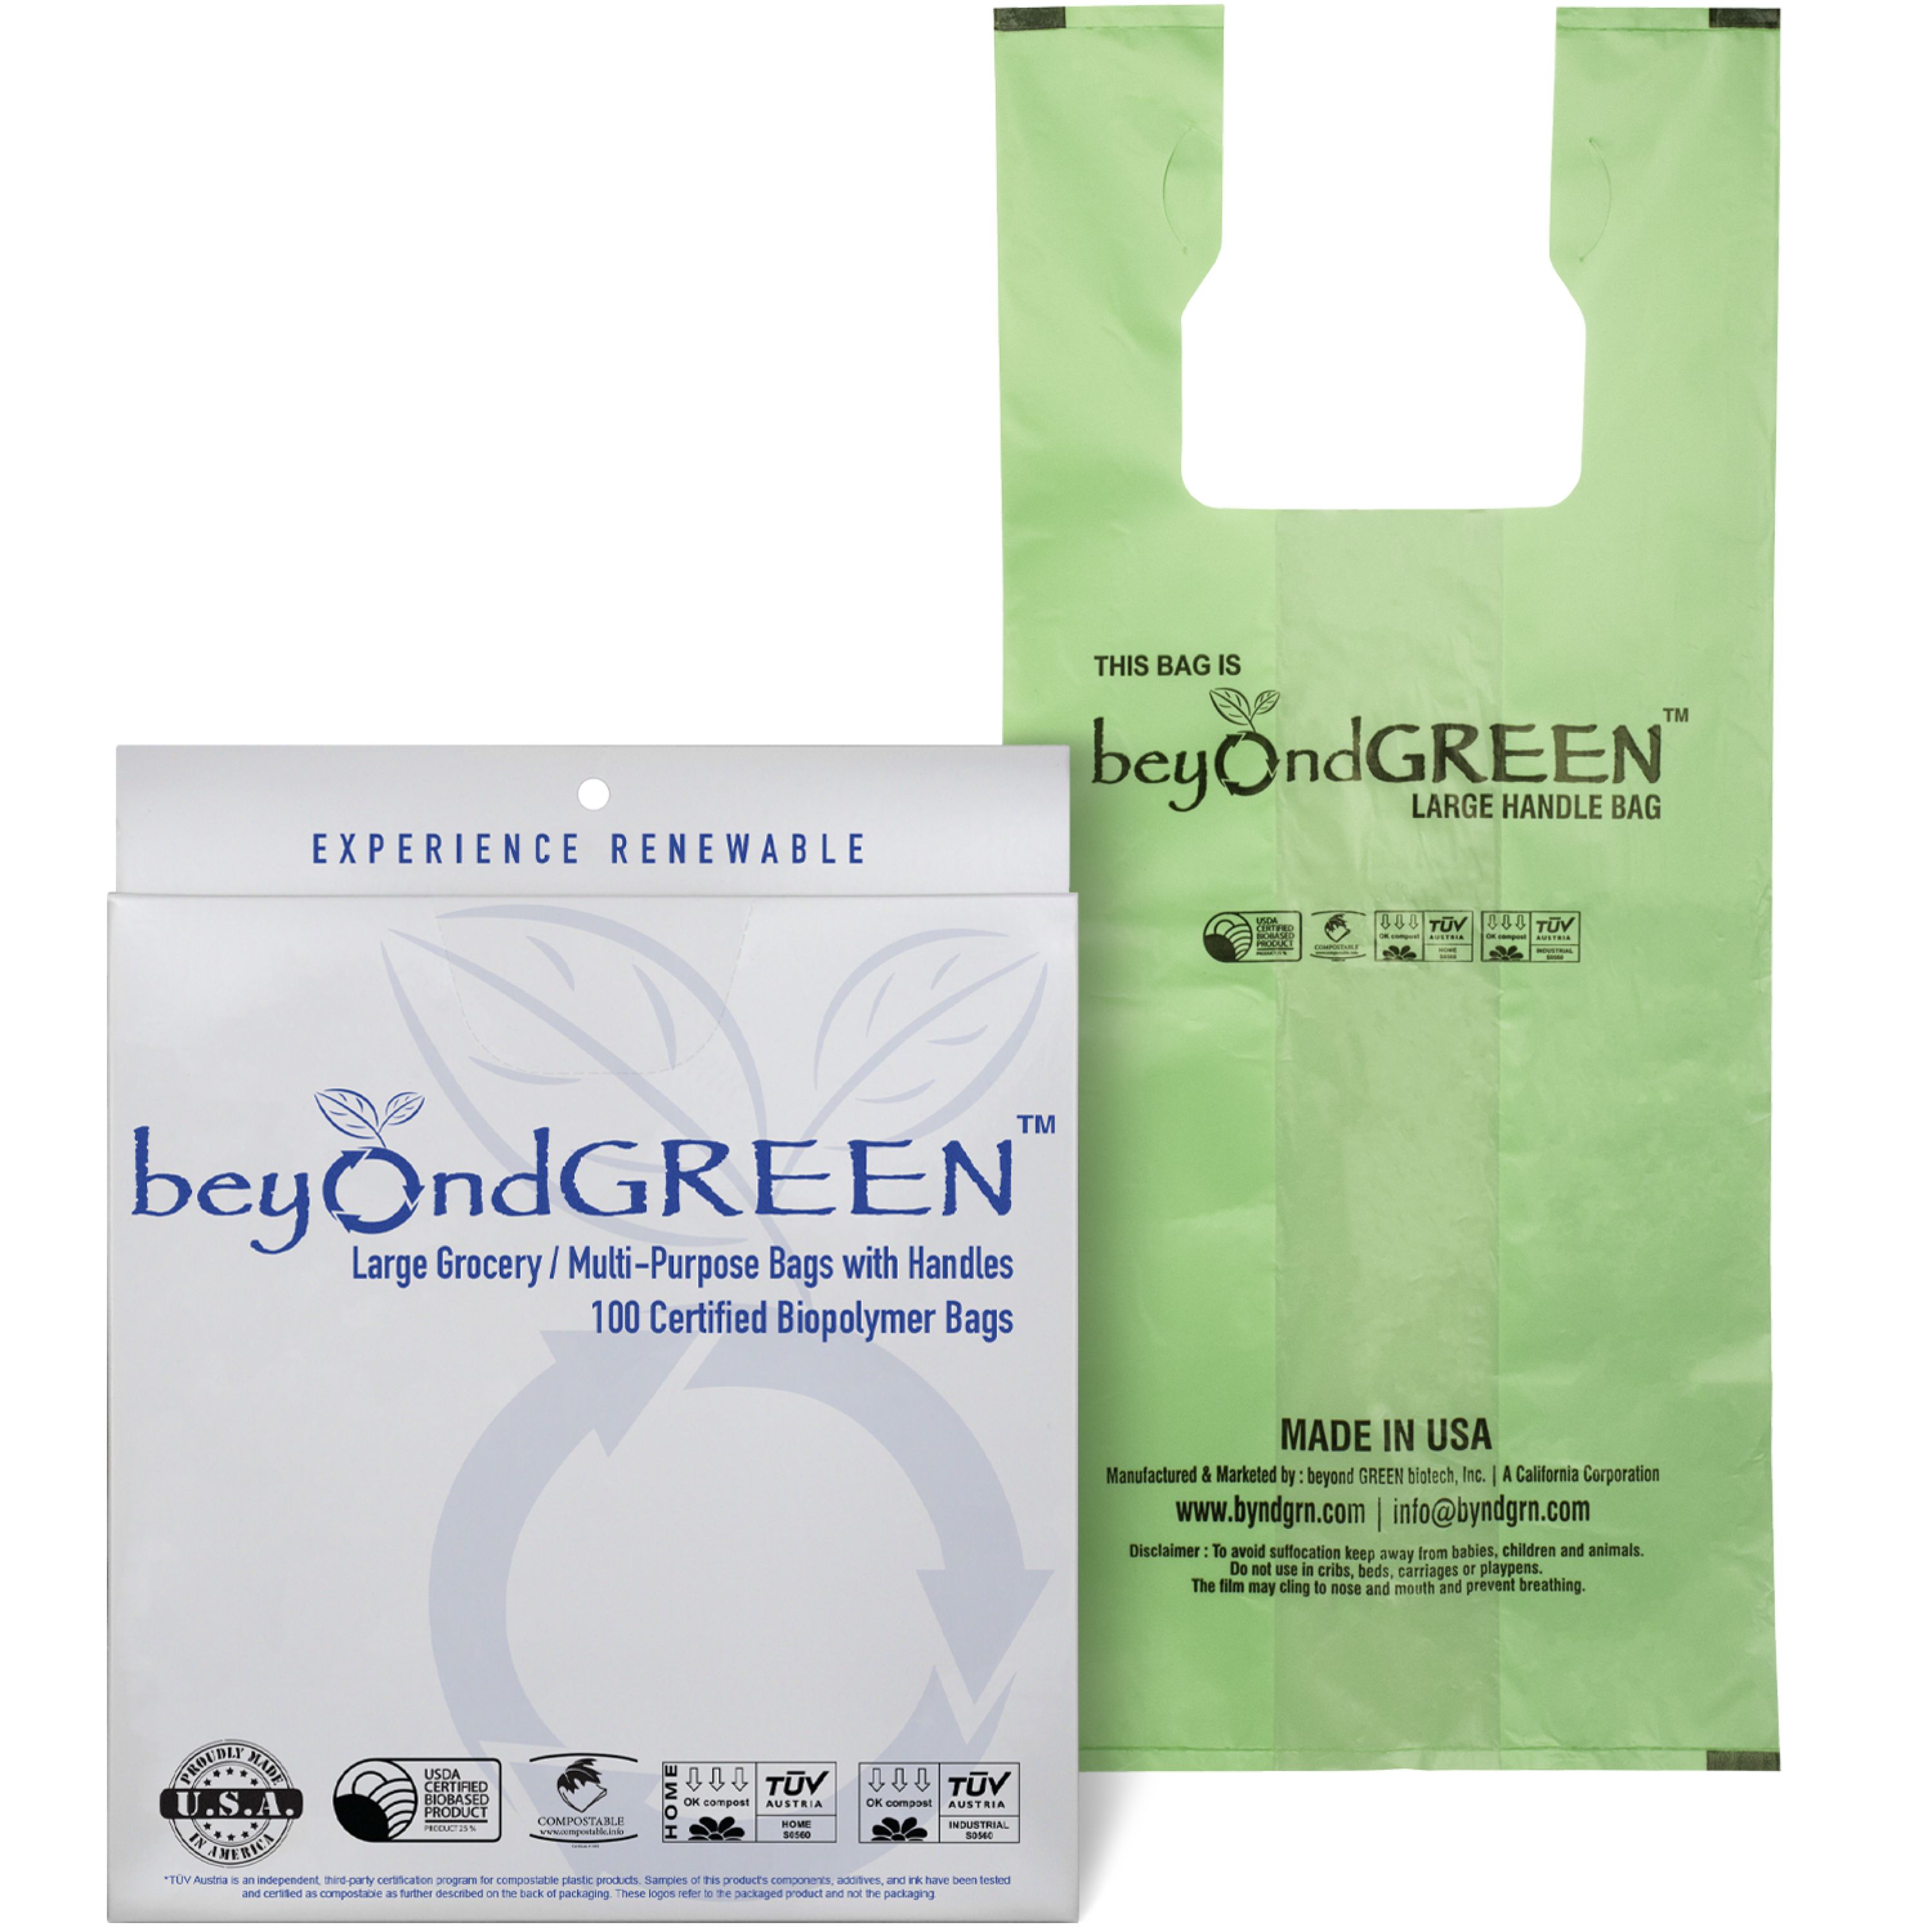 Top 5 Reasons to Go Green with Your Garbage Bags